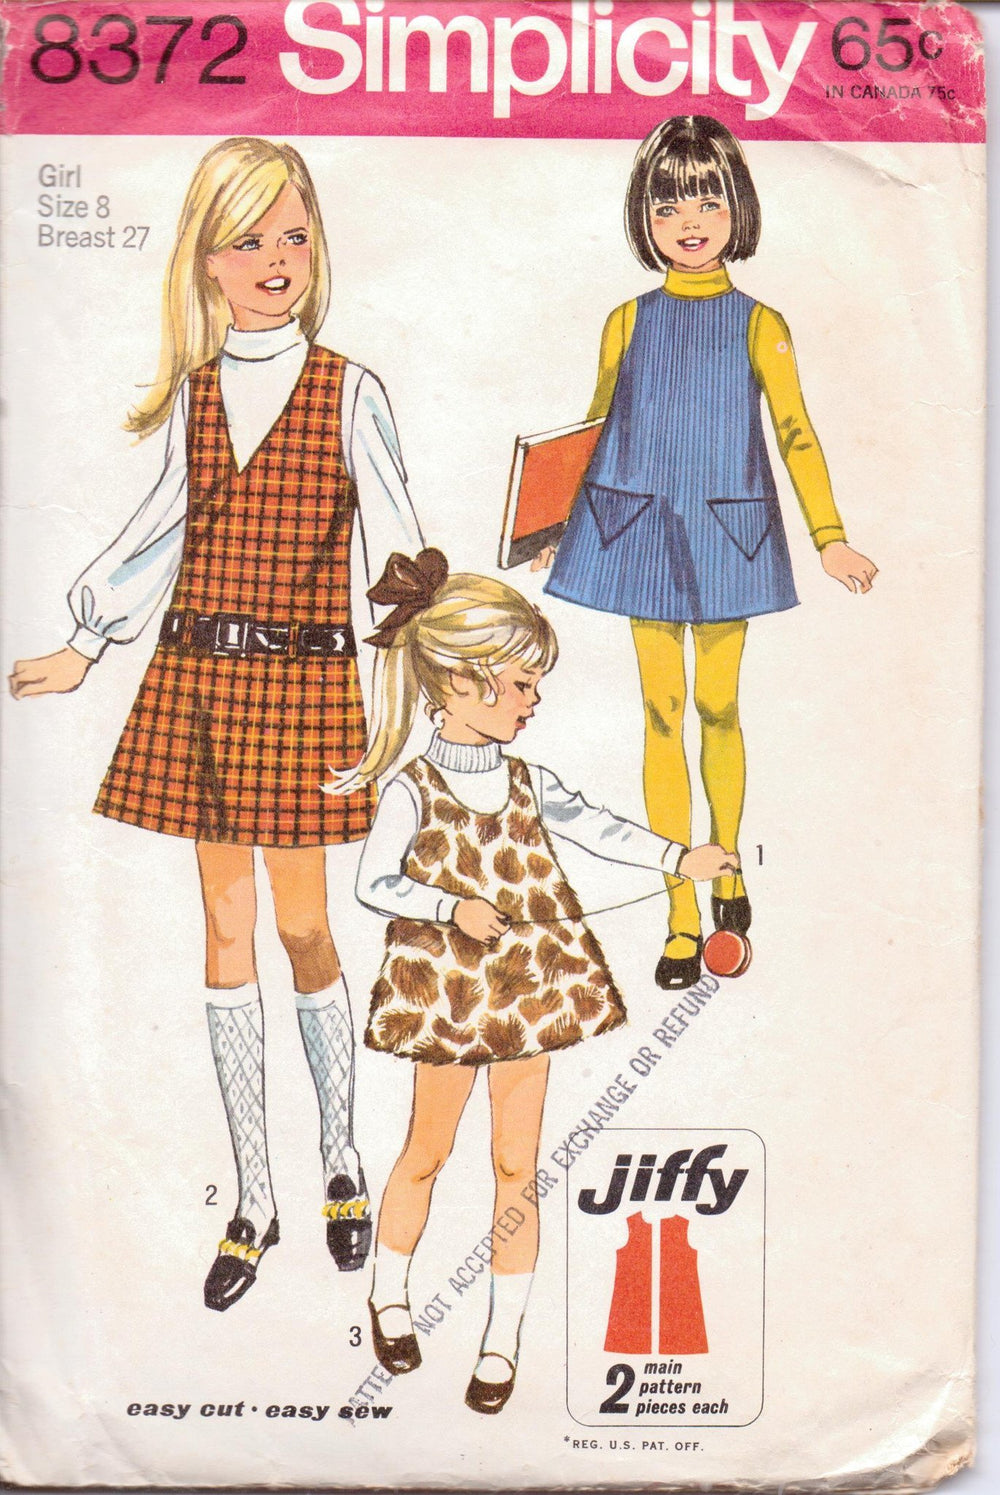 Simplicity 8372 Little Girls Jumper Dress Vintage 1960's Sewing Pattern Jiffy Size 8 Breast 27 - VintageStitching - Vintage Sewing Patterns